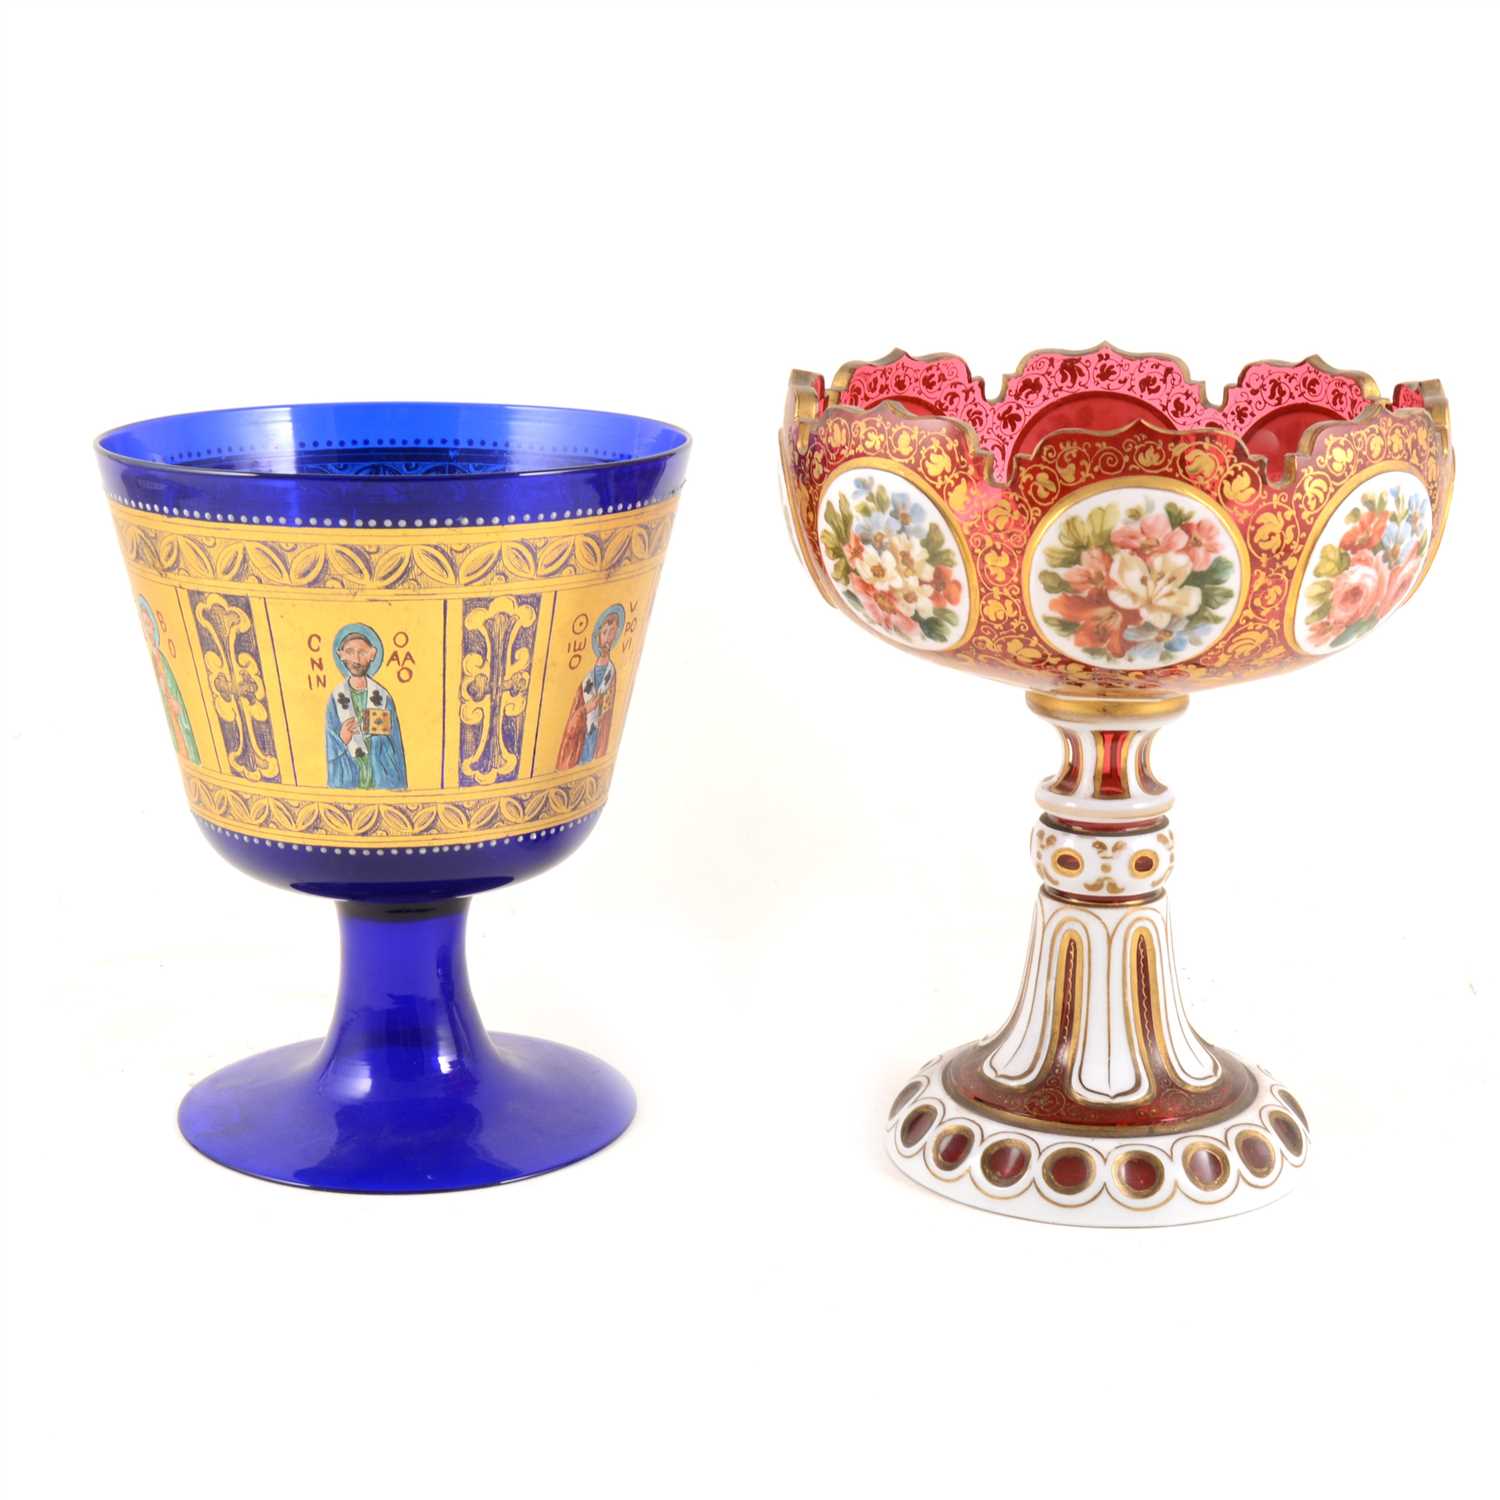 Lot 23 - A Bohemian ruby glass pedestal dish overlaid in white and gilt with eight floral vignettes, and a Bristol blue goblet with heavily gilded ecclesiastical panels depicting saints